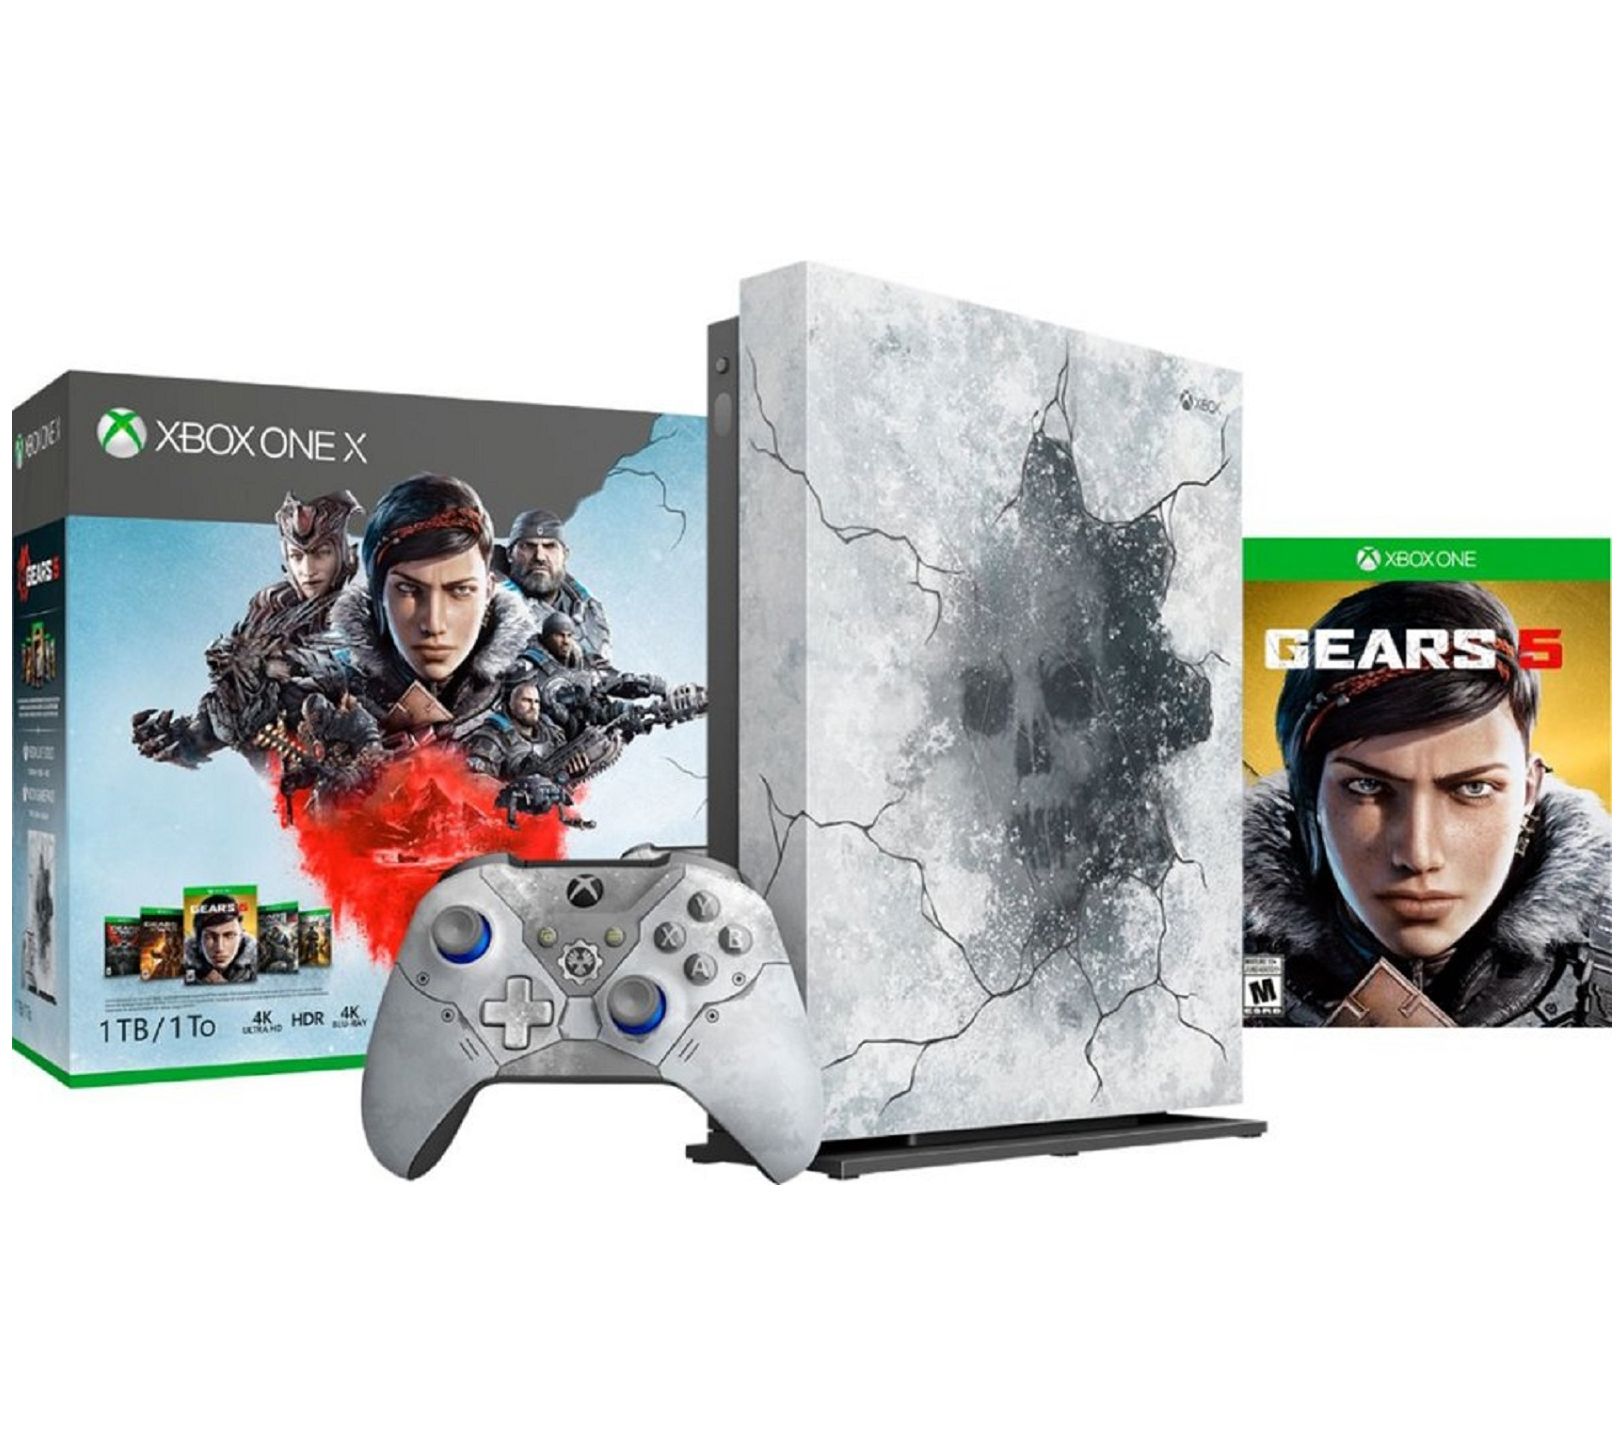 Gears of War Limited Edition Xbox 360 Game